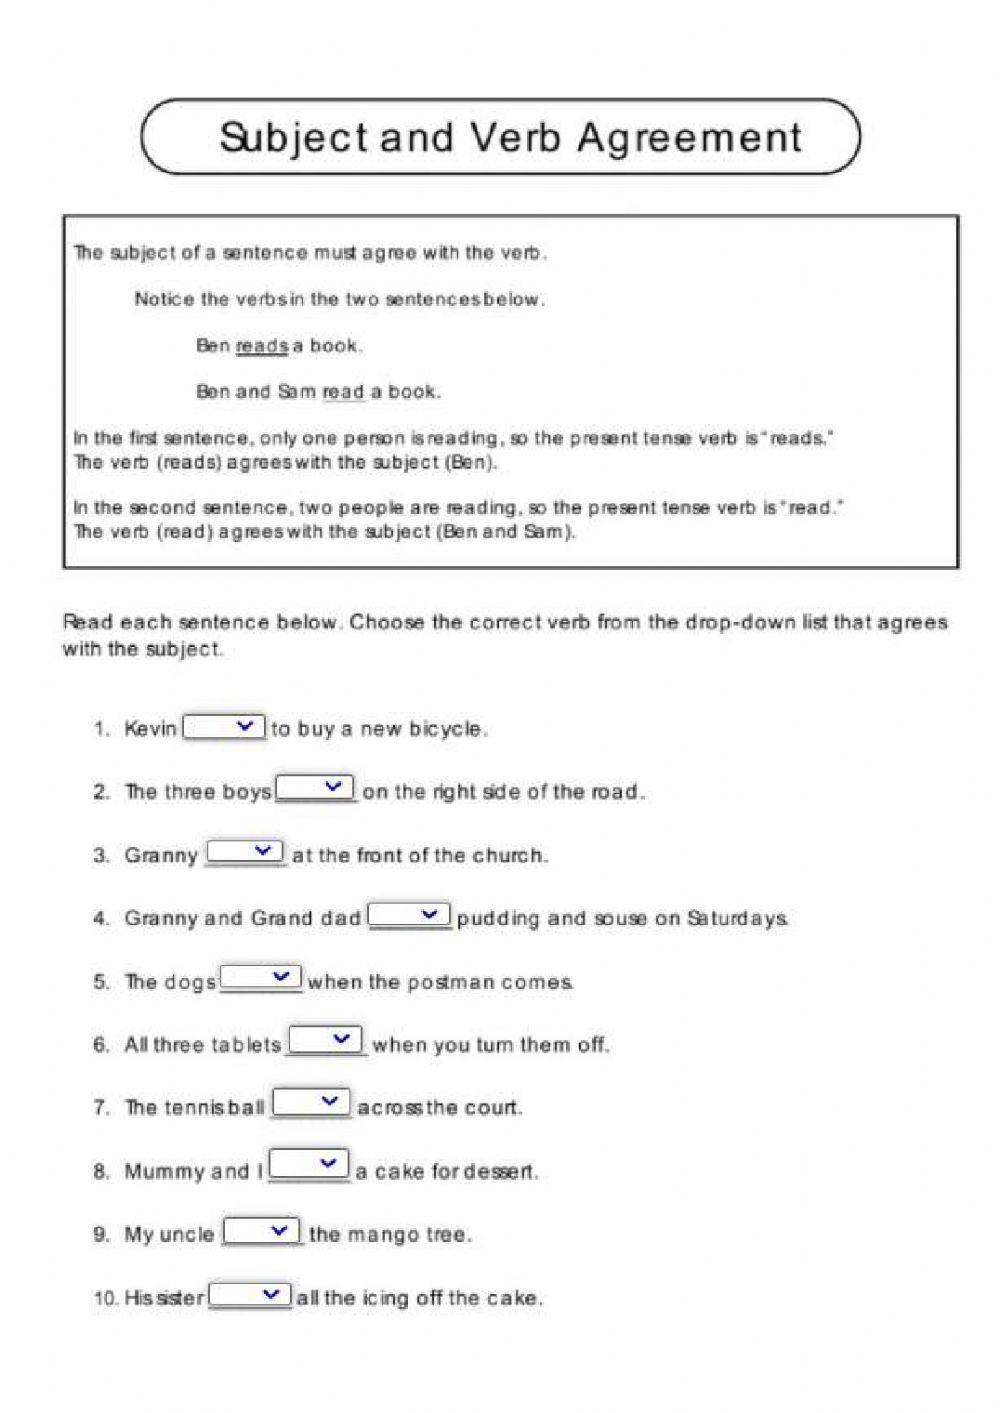 Subject verb agreement quiz with no errors